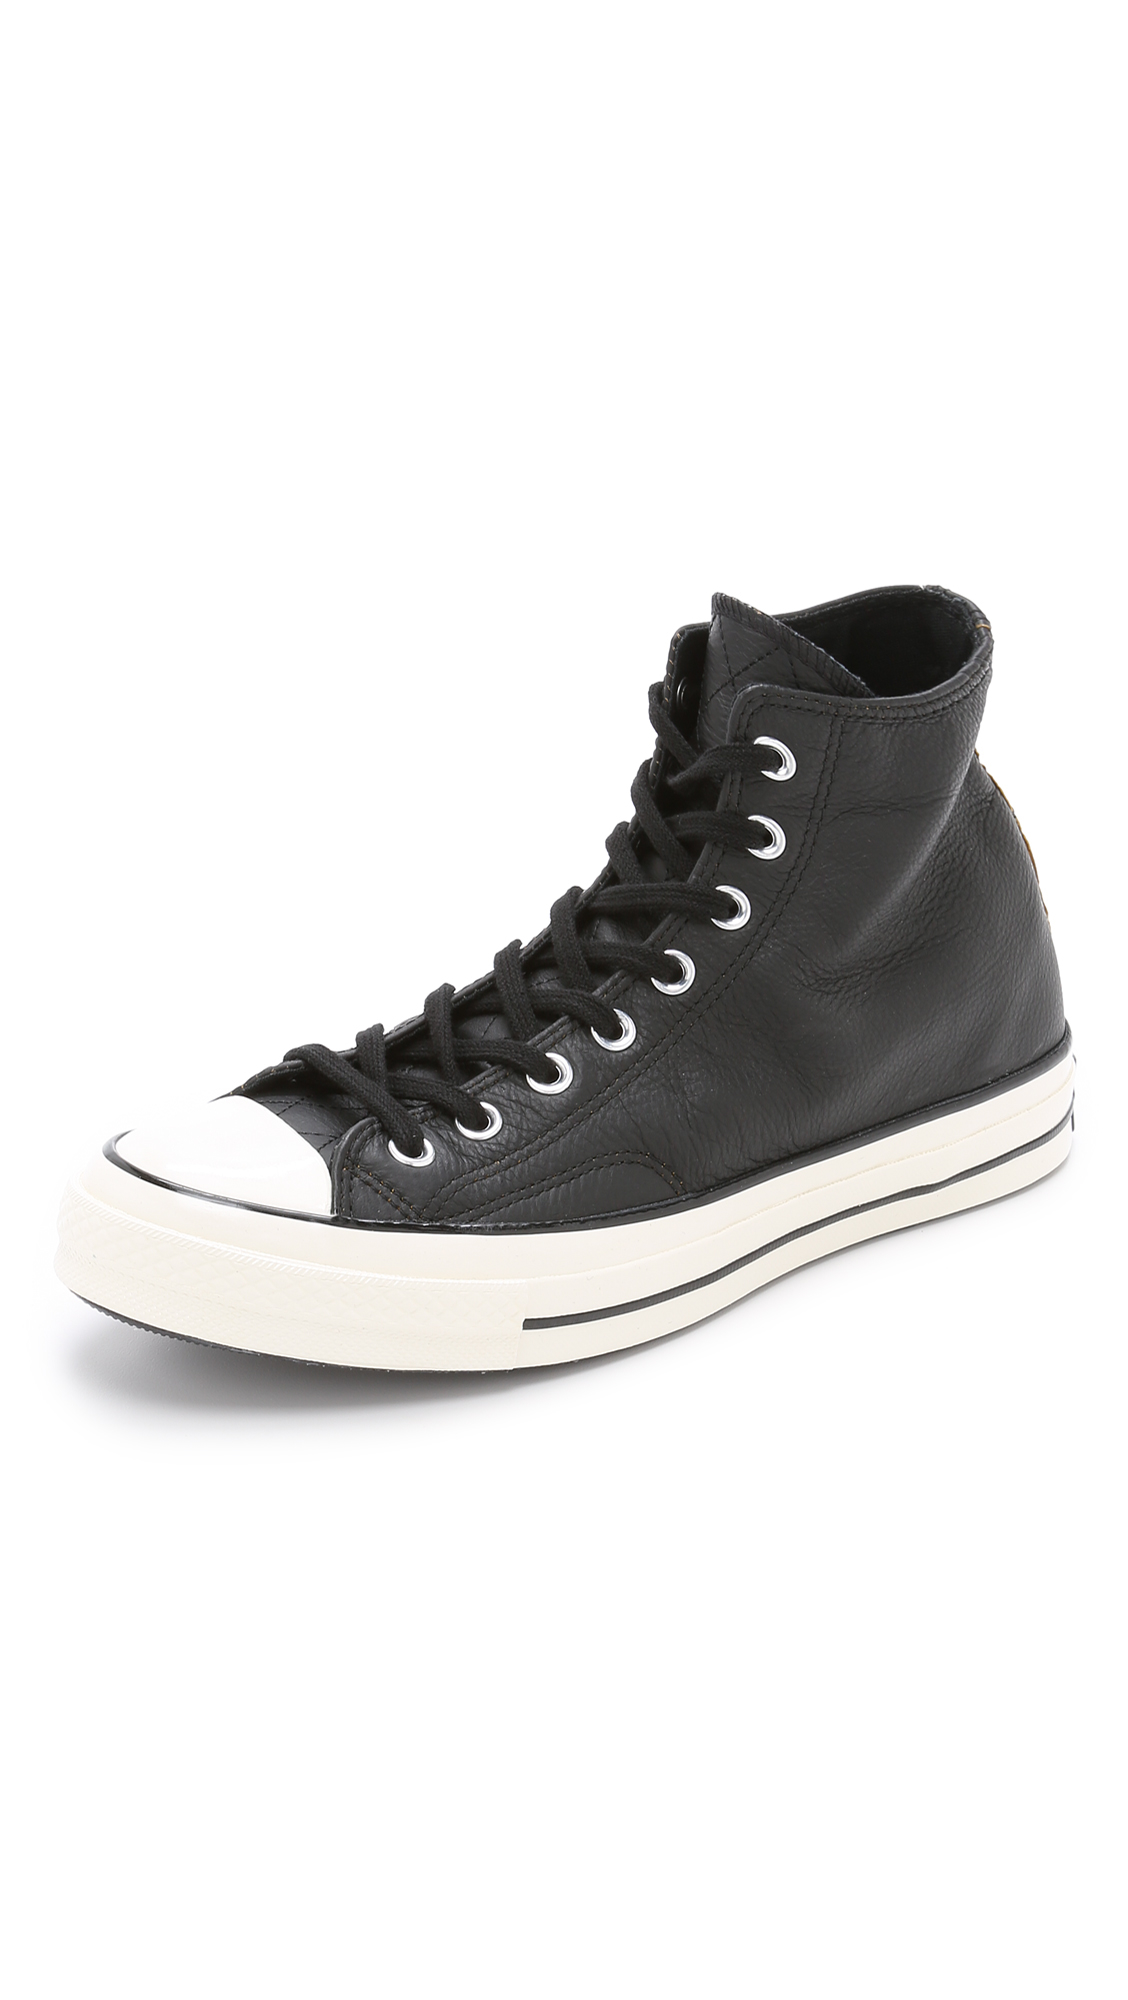 Converse Chuck Taylor All Star '70s Leather High Top Sneakers in Black ...